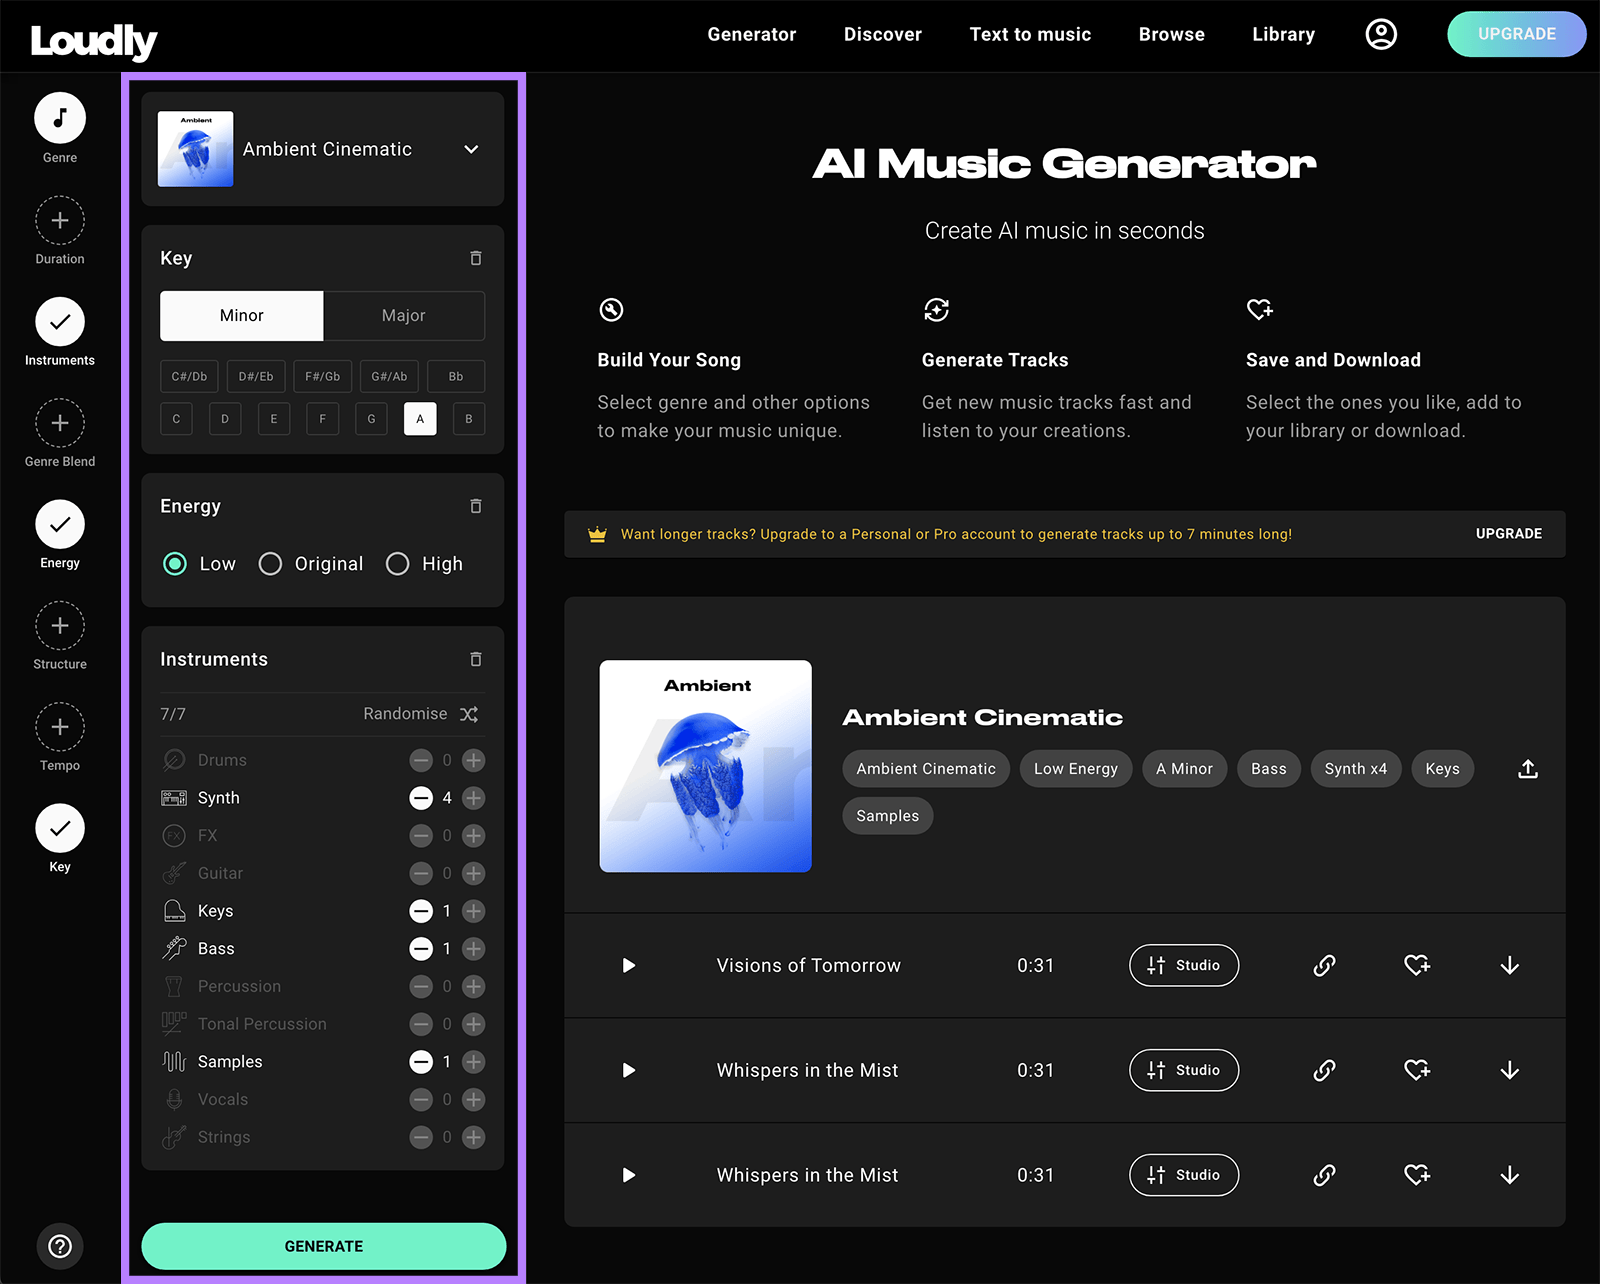 Loudly dashboard with AI music generation options highlighted.